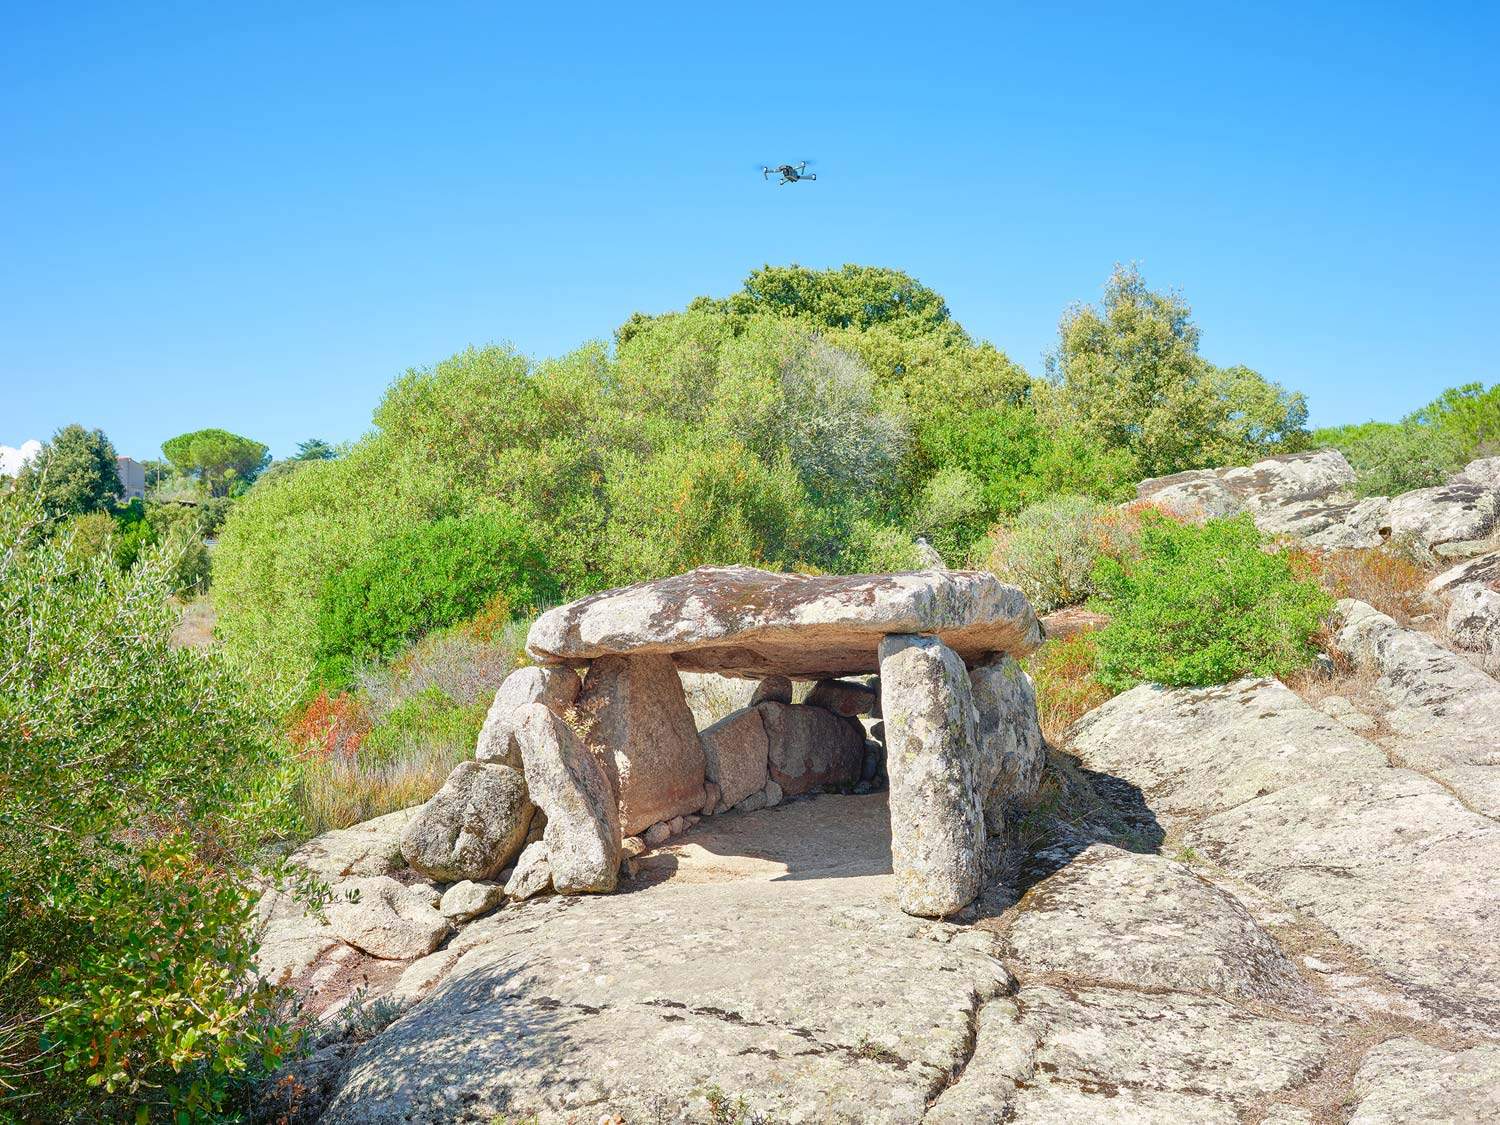 Nuoro, at MAN the great photographer Olivo Barbieri brings the menhirs and dolmens of Sardinia